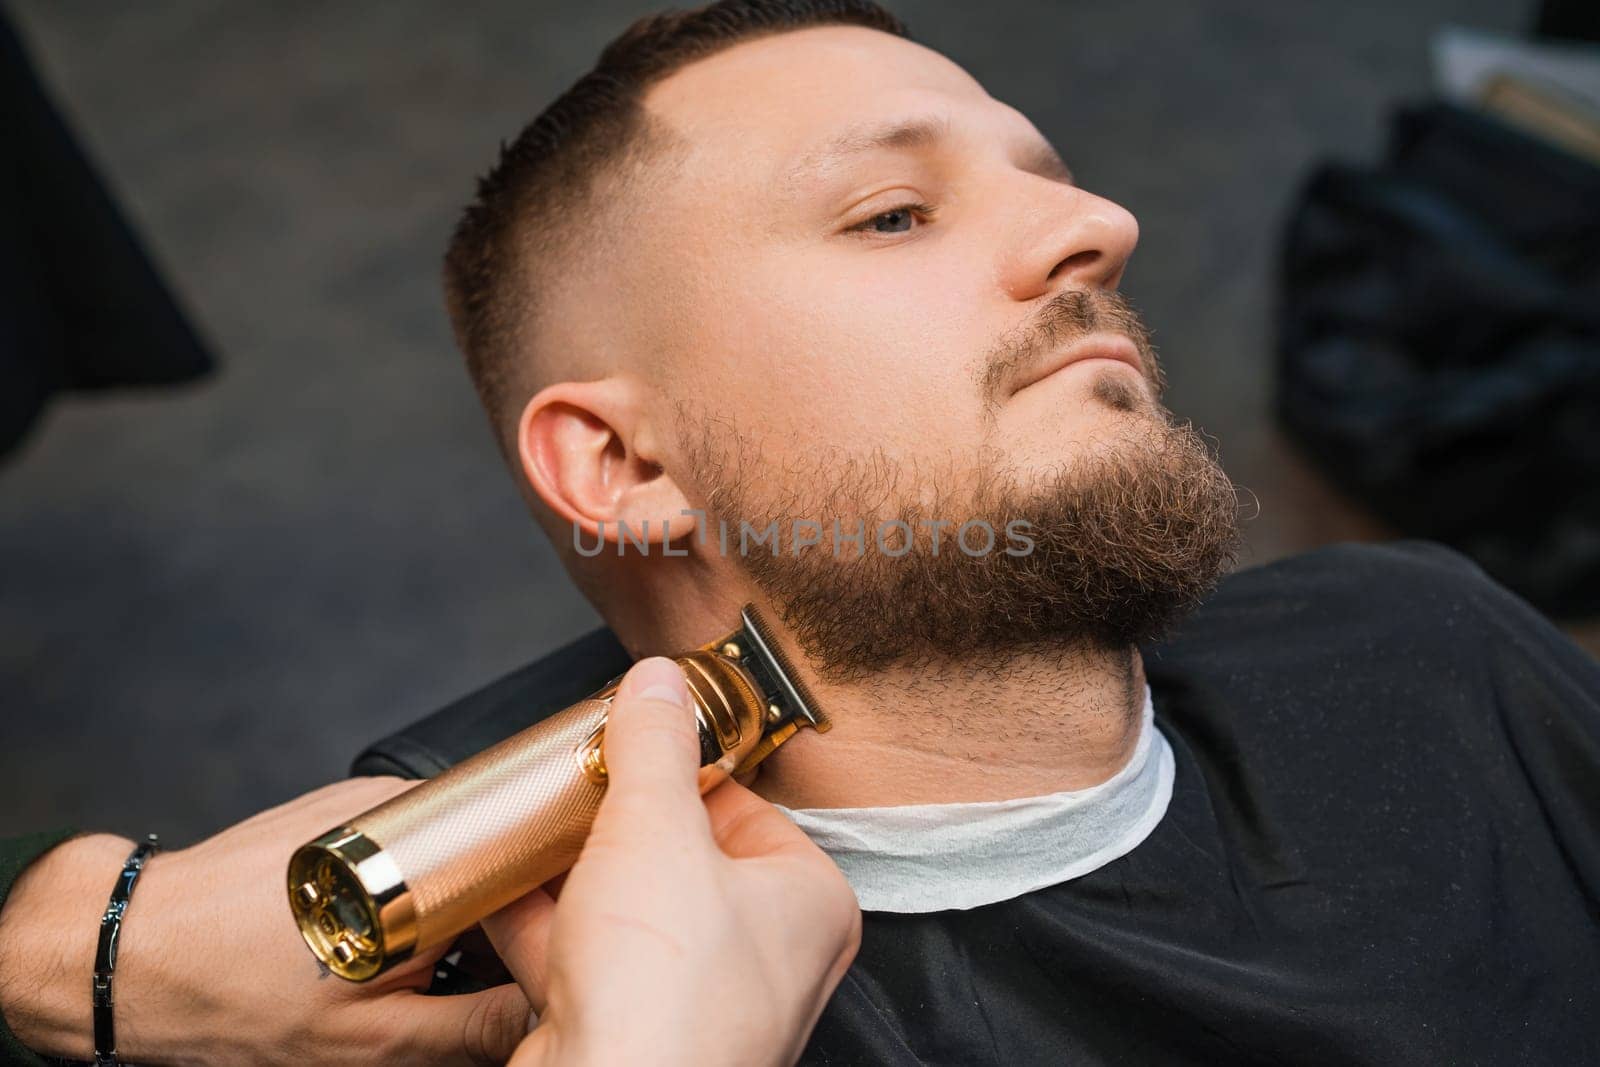 Stylist uses trimmer and comb to cut with client beard by vladimka